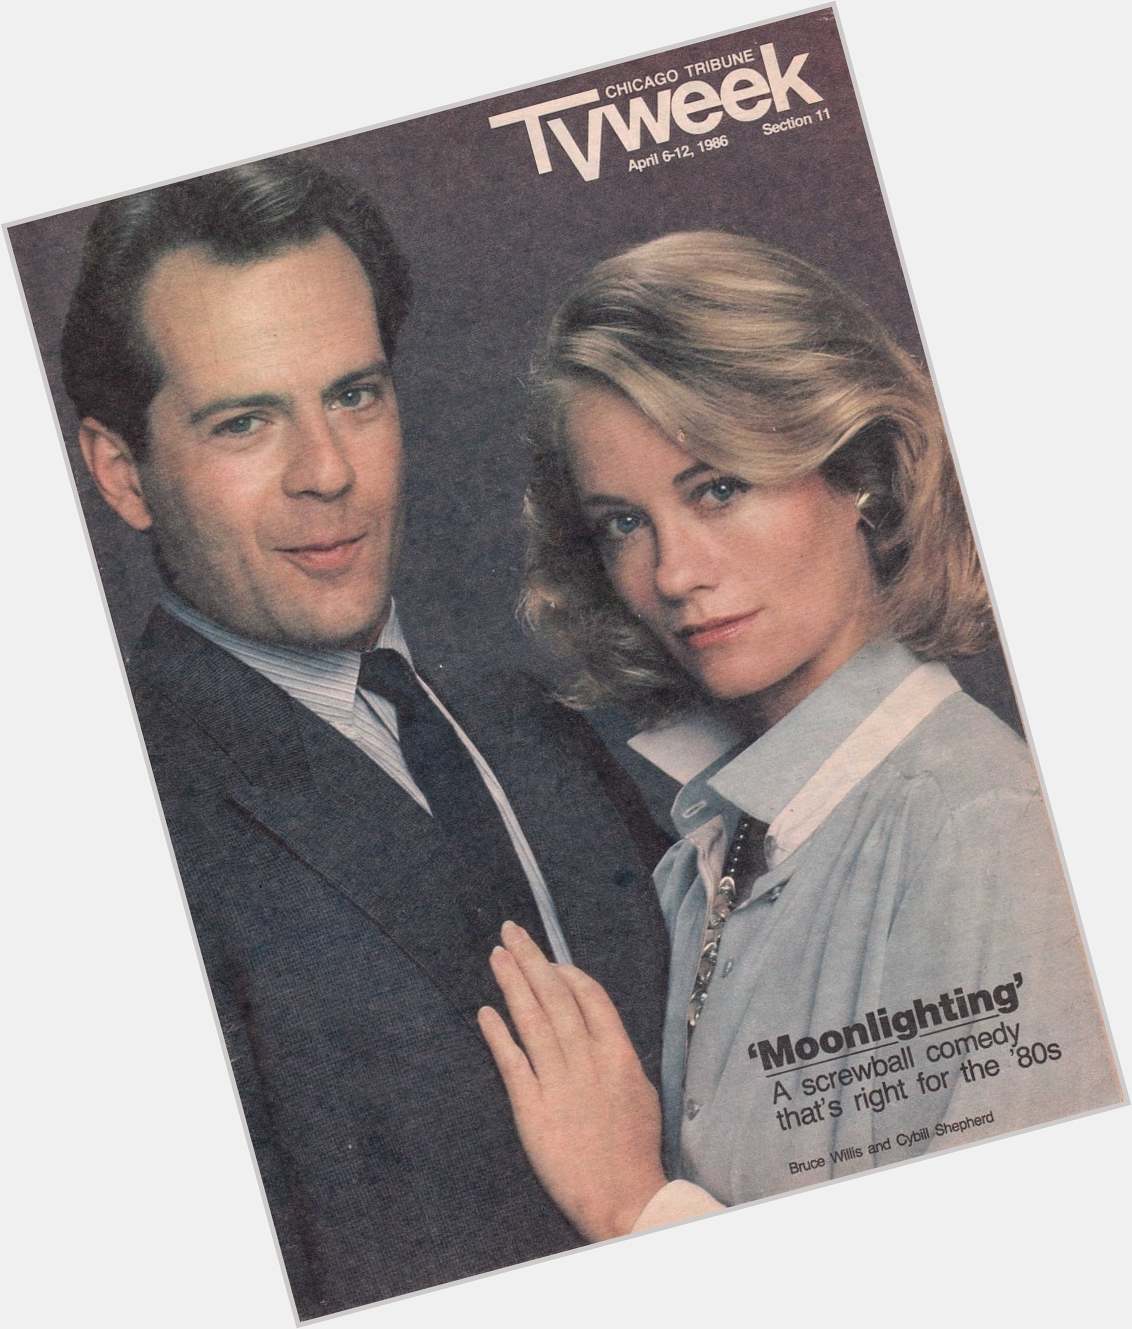 Happy Birthday to Bruce Willis, born on this day in 1955
Chicago Tribune TV Week.  April 6-12, 1986 